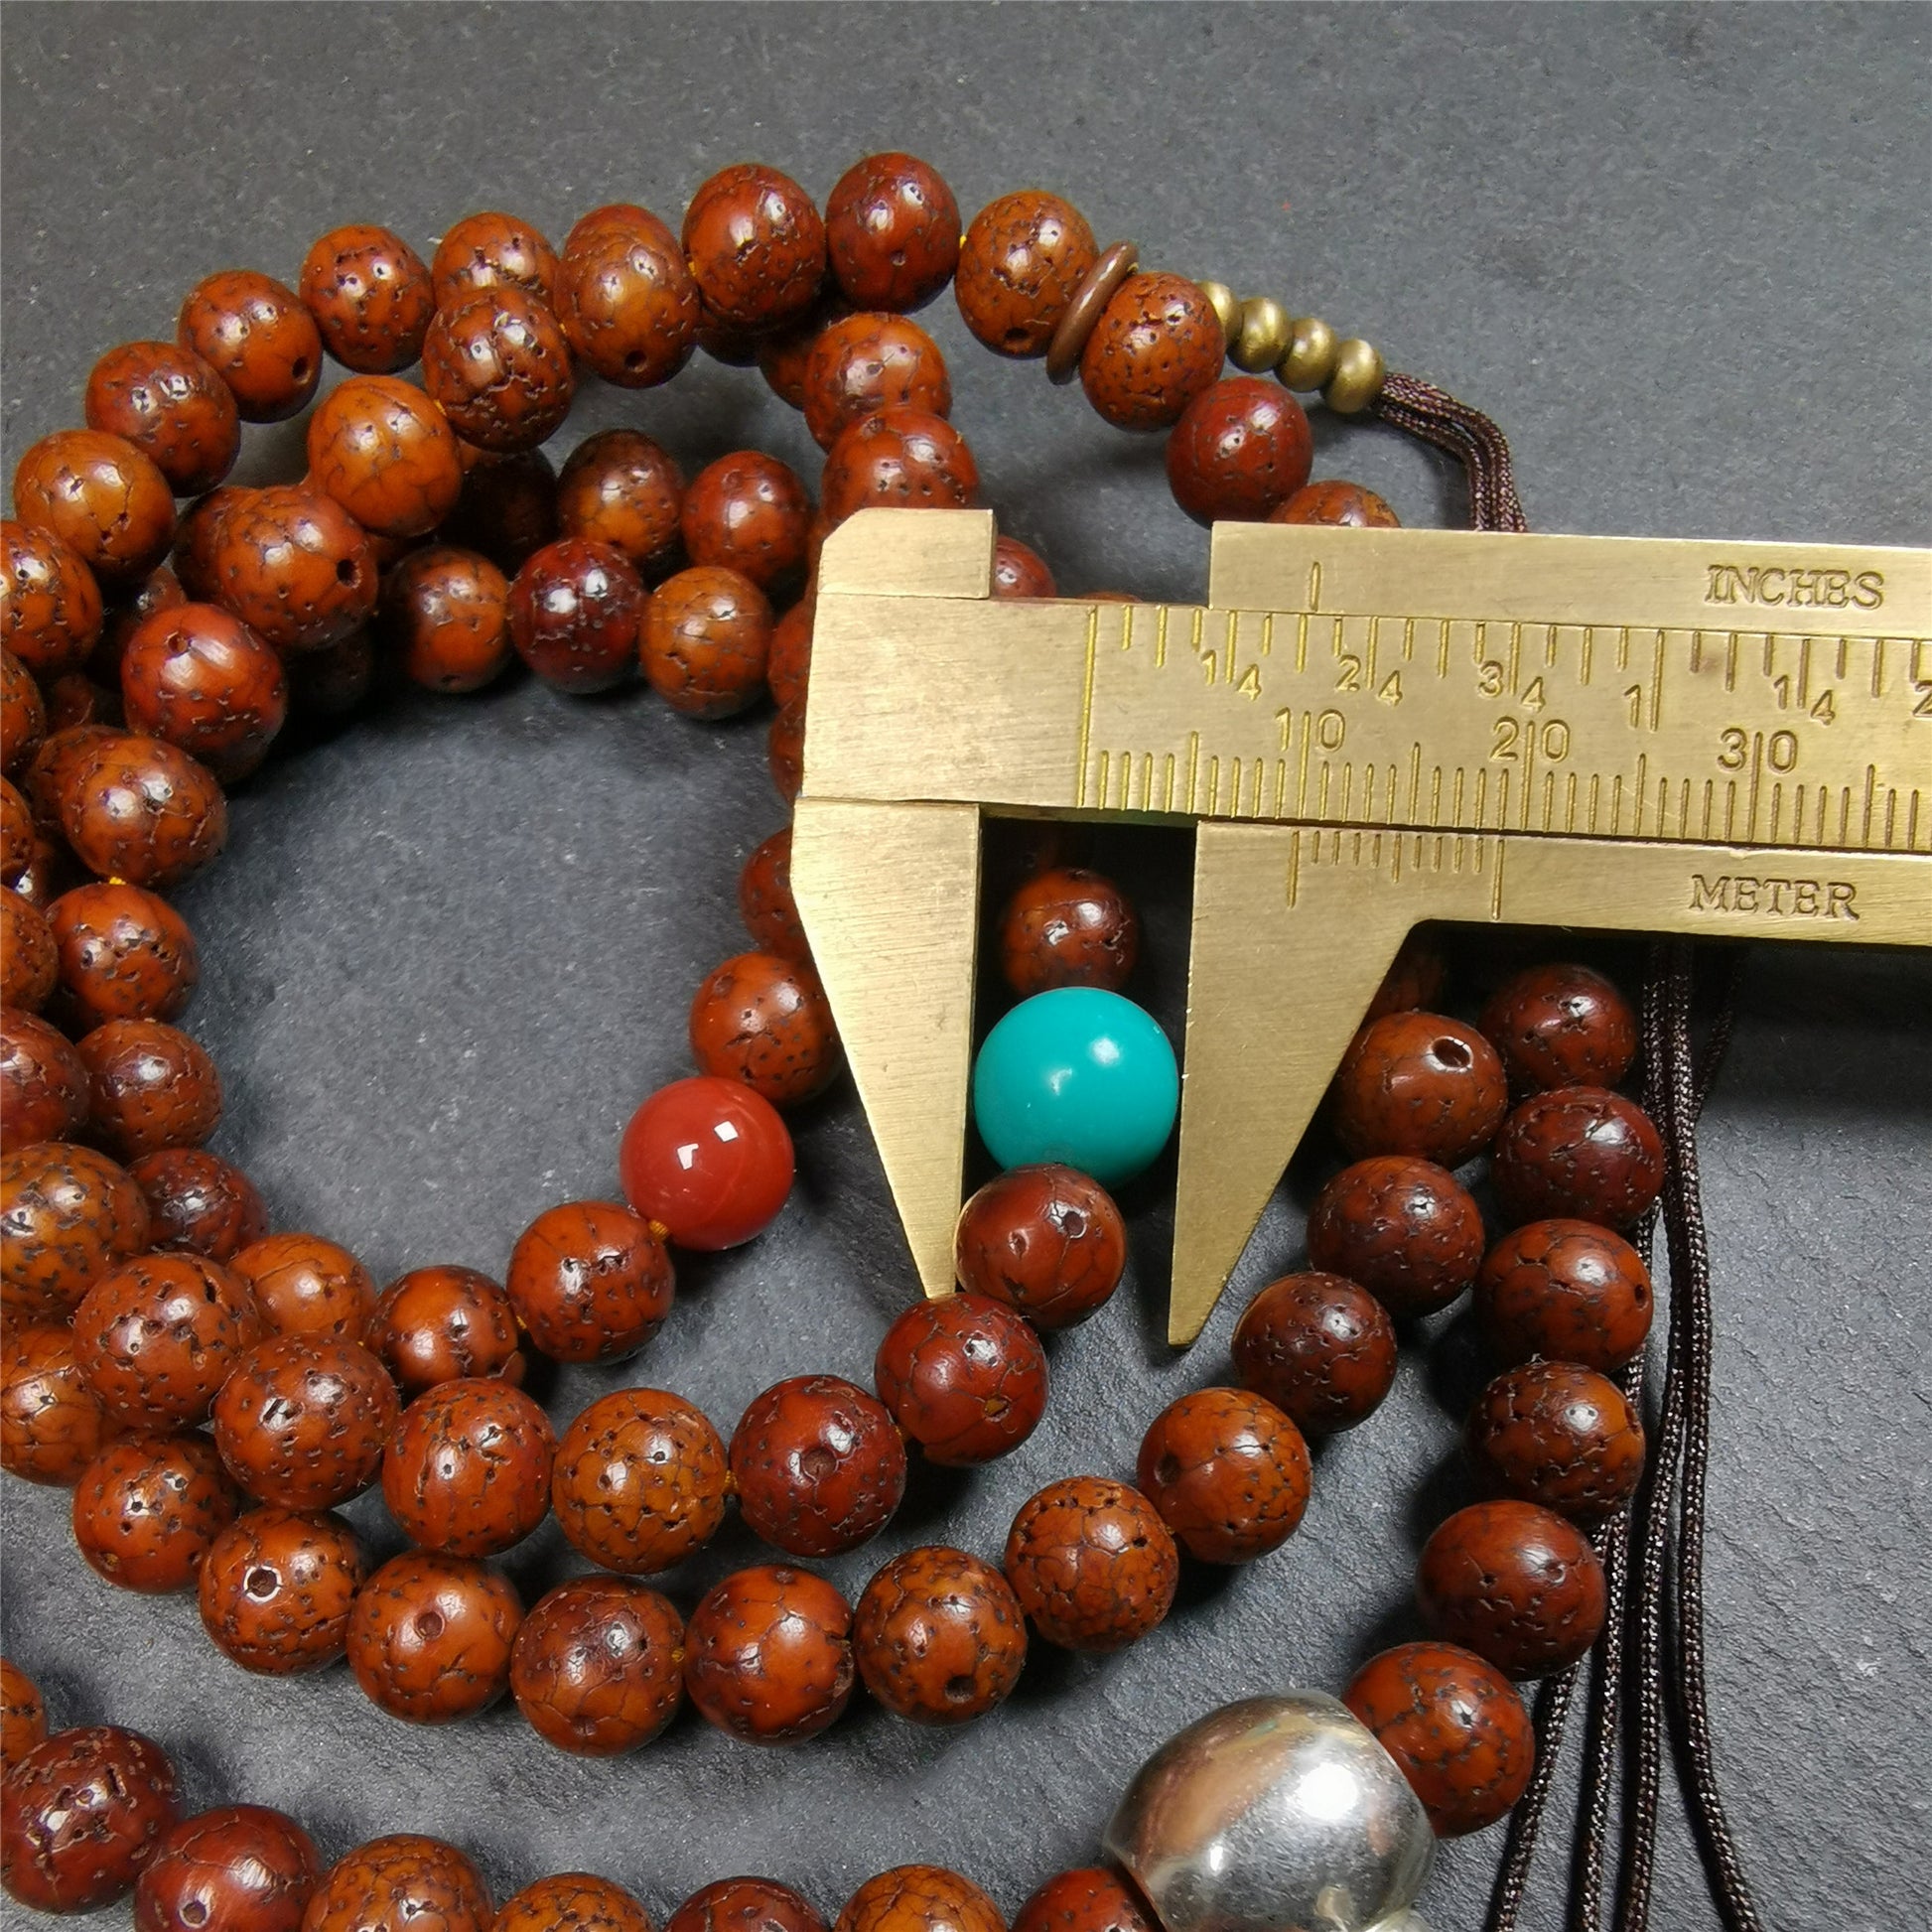 This old lotus seed mala was handmade from tibetan crafts man in Baiyu County,about 30 years old,blessed by lama. It's composed of 108 pcs 8mm lotus seed beads,then add some old agate,turquoise beads,1 pair of copper bead counters,and white copper guru bead on it.